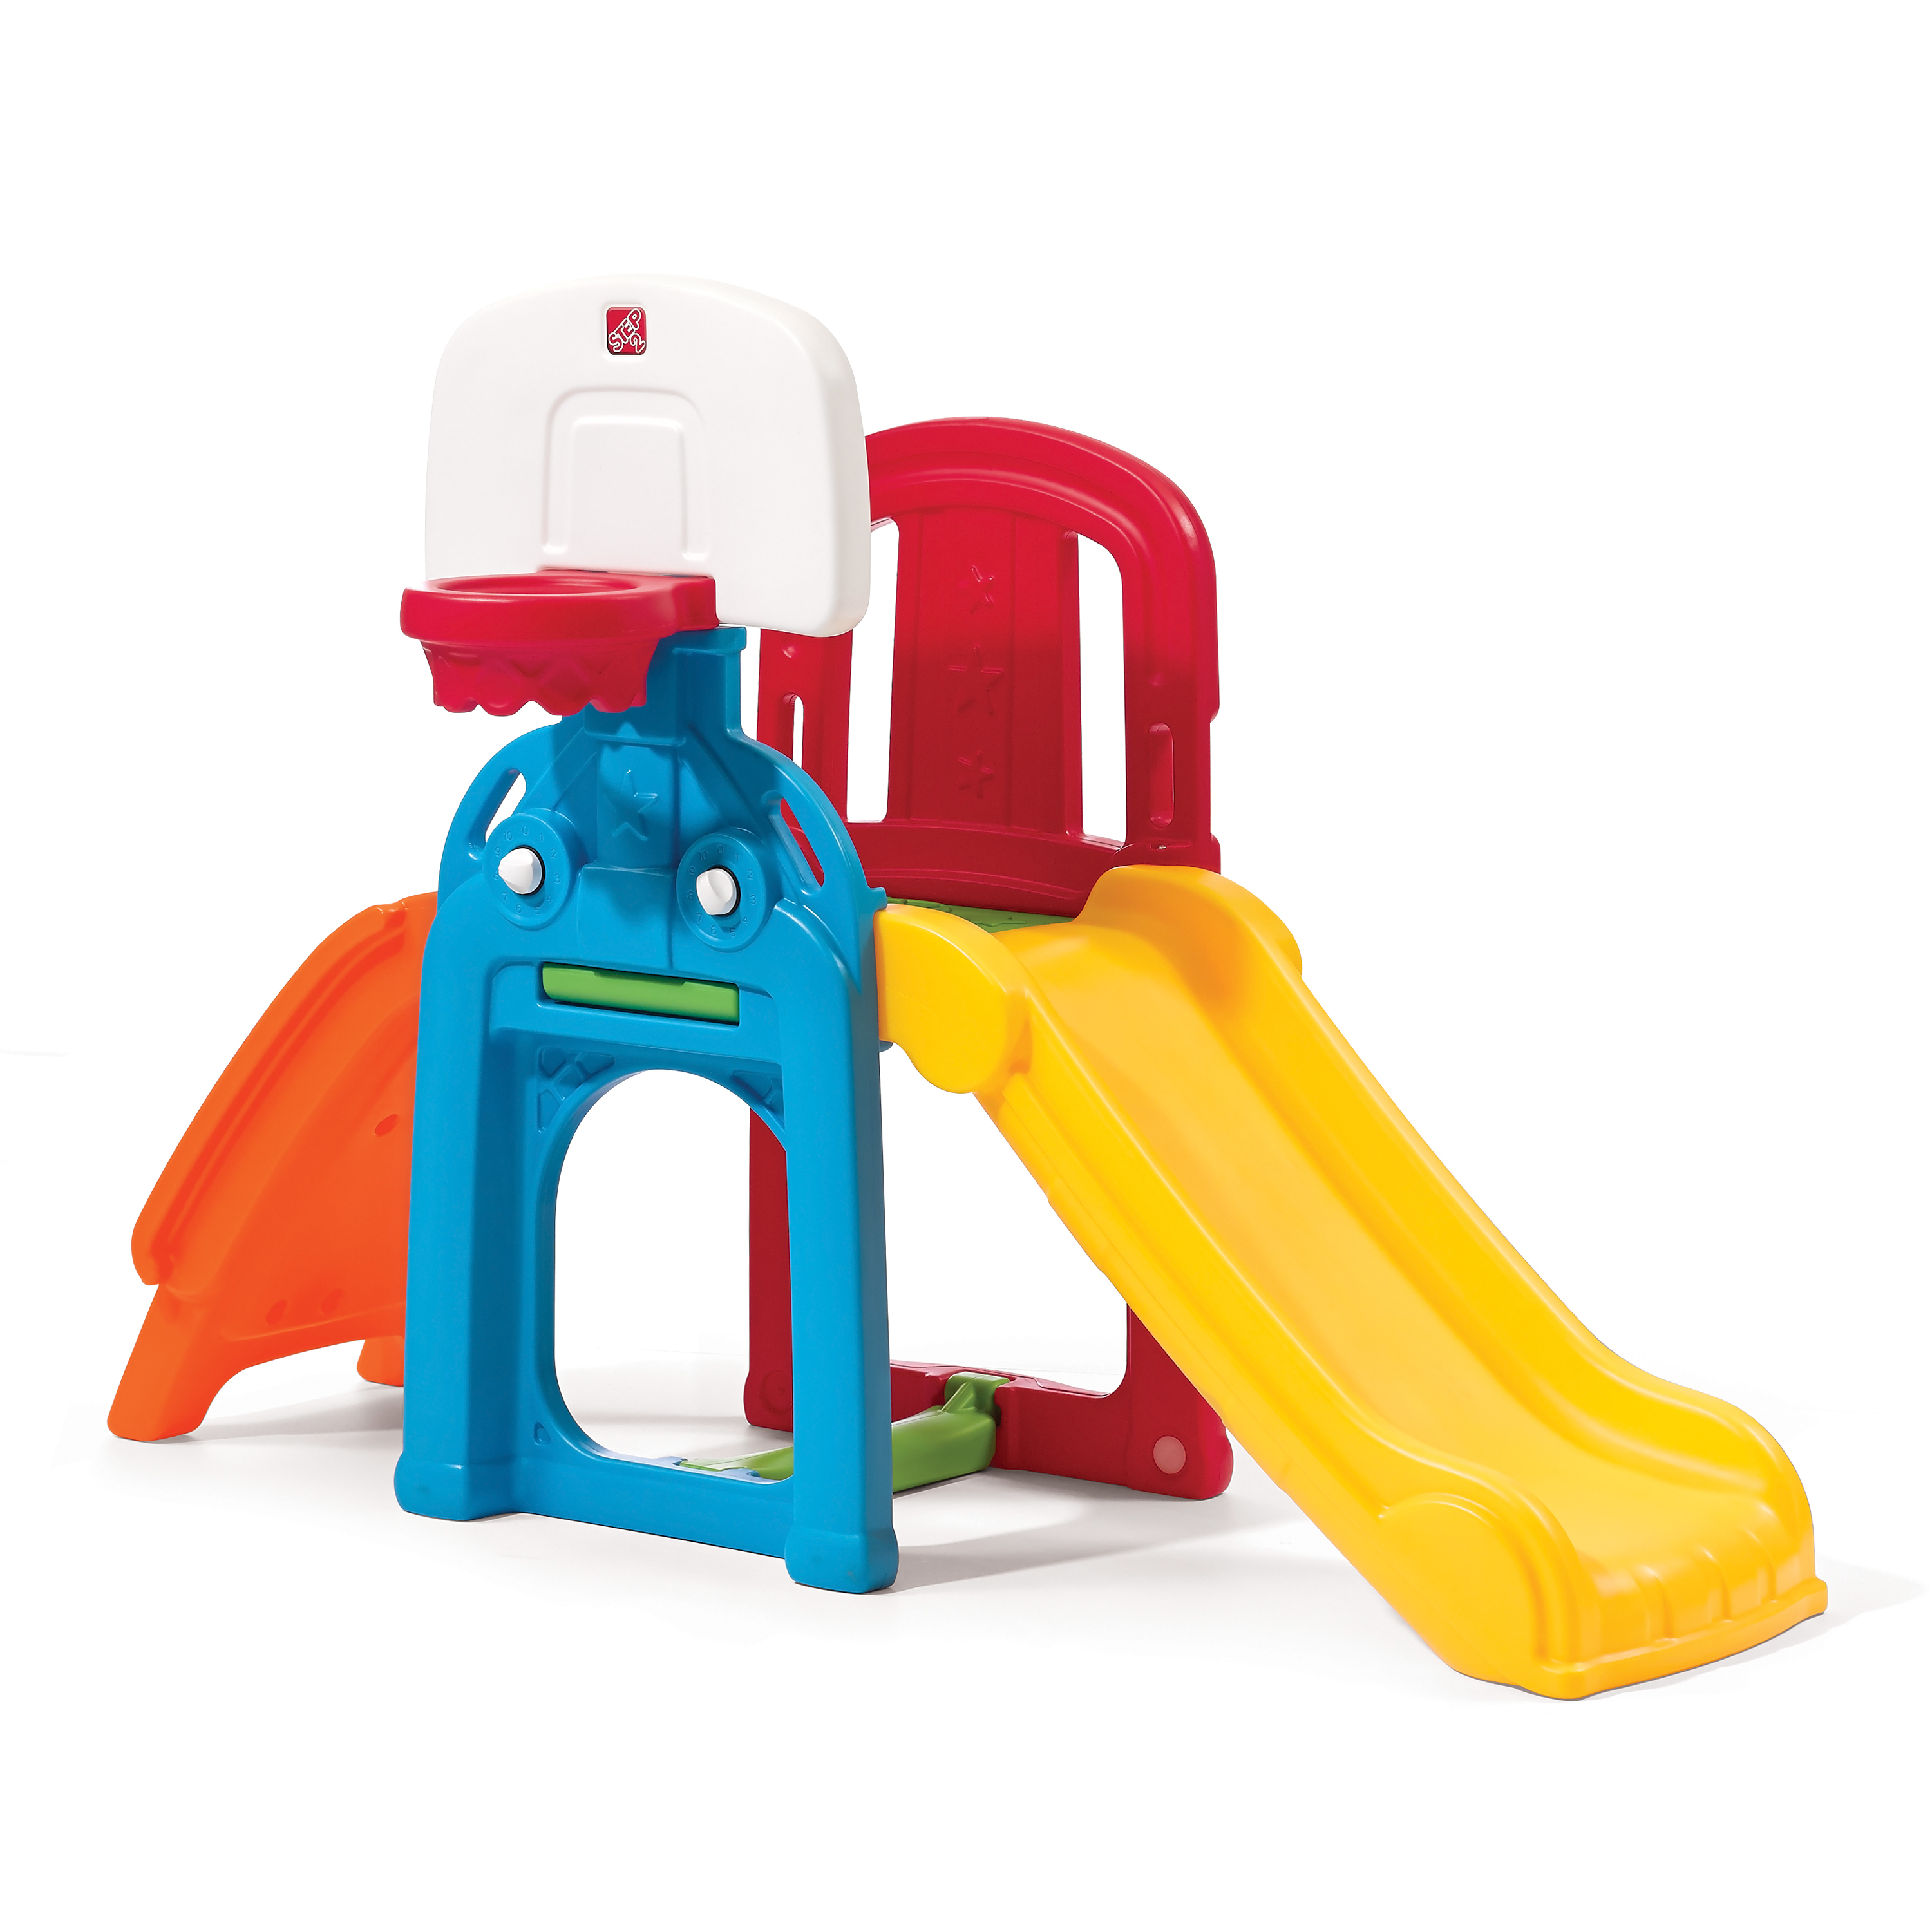 Get Fun Childrens Toys And Games at Kmart